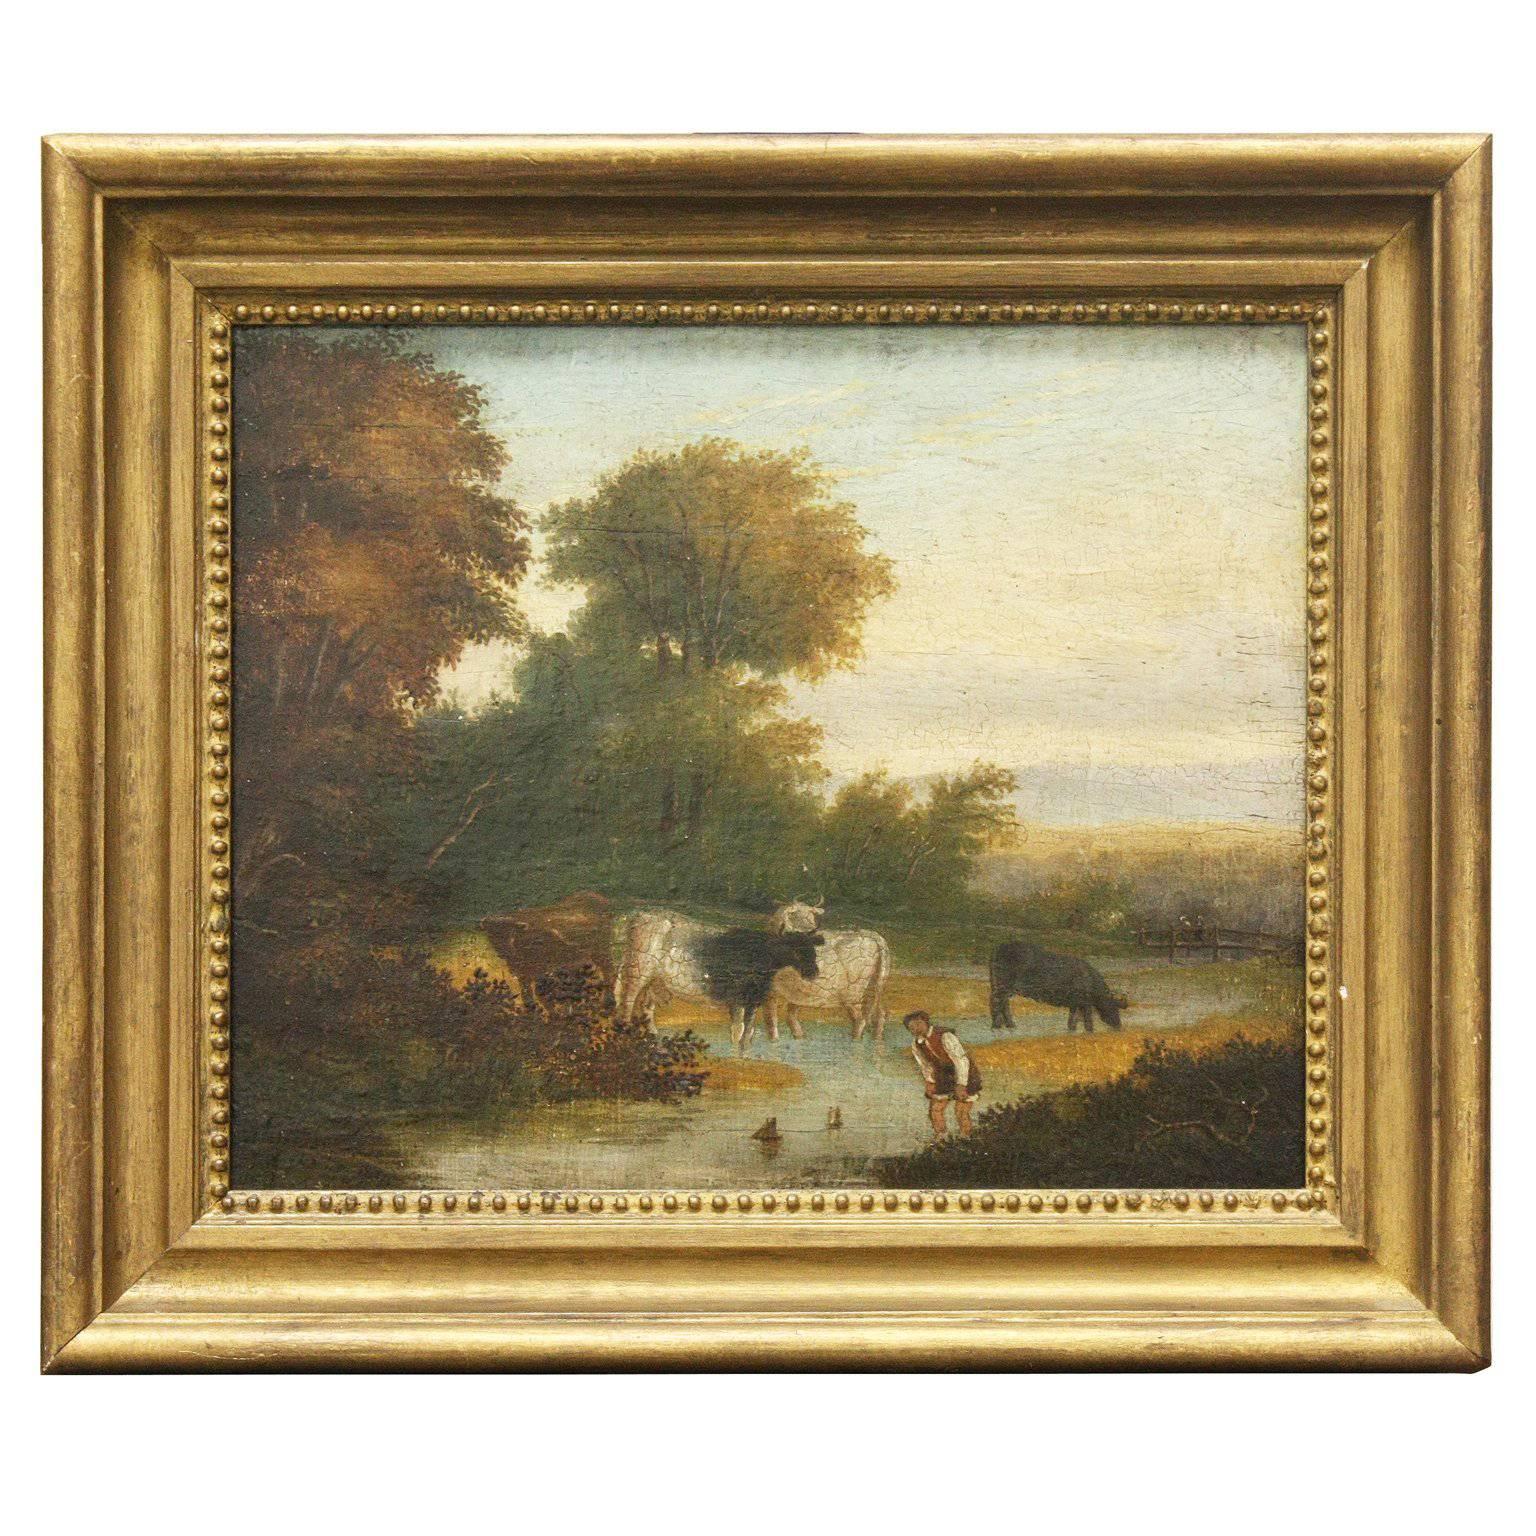 19th Century English Painting of Man with Cows Wading in a Stream